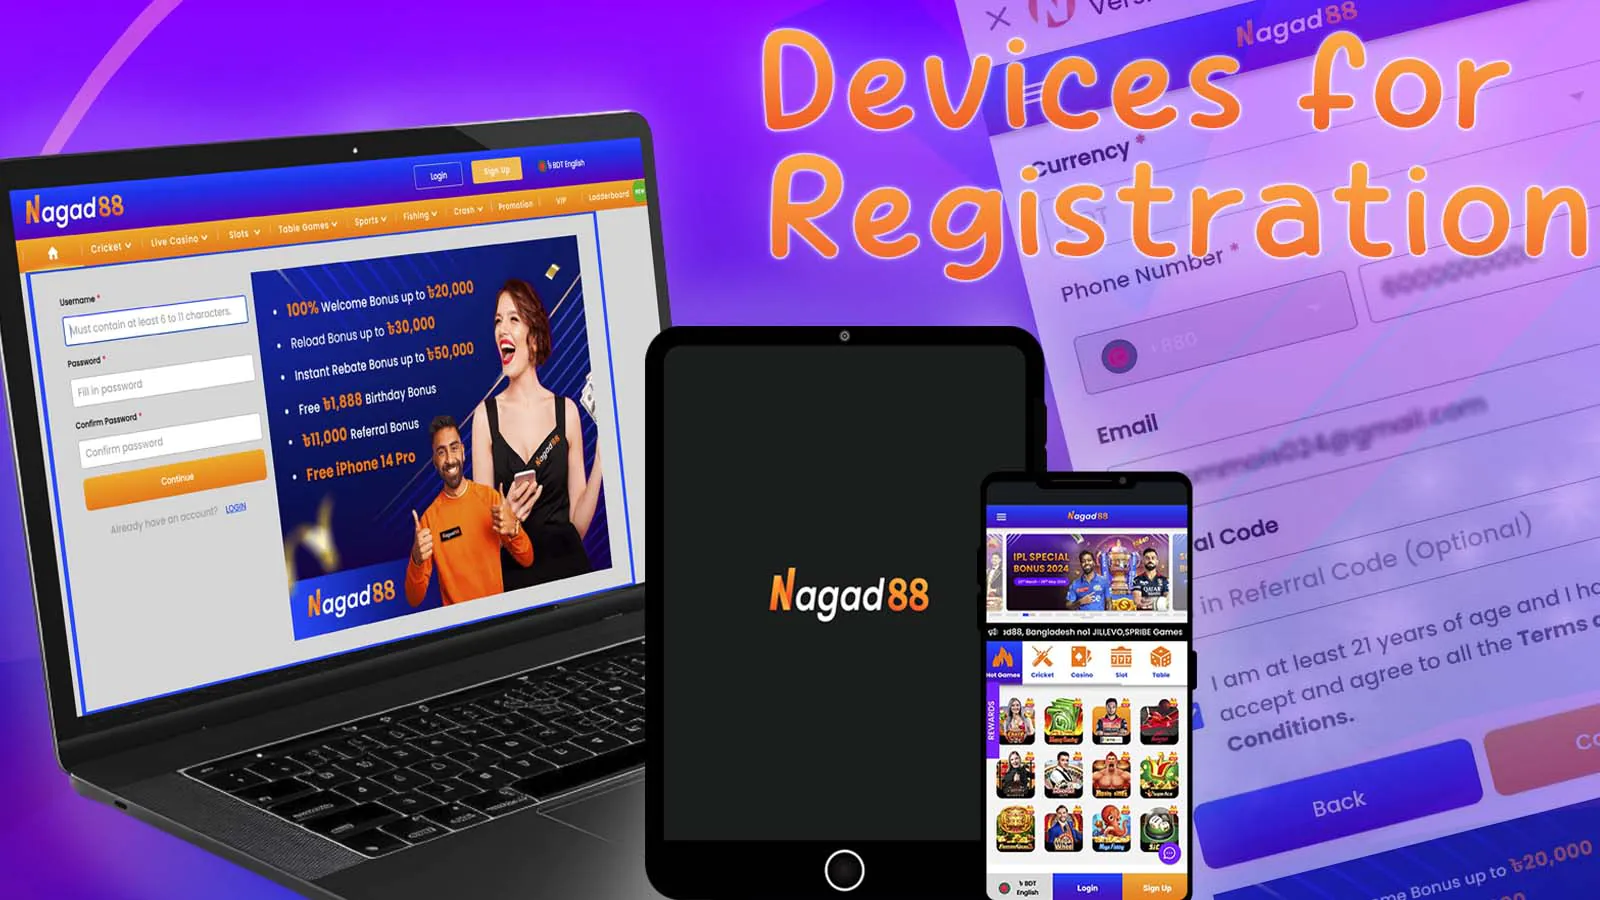 Devices you can use for Nagad88 registration